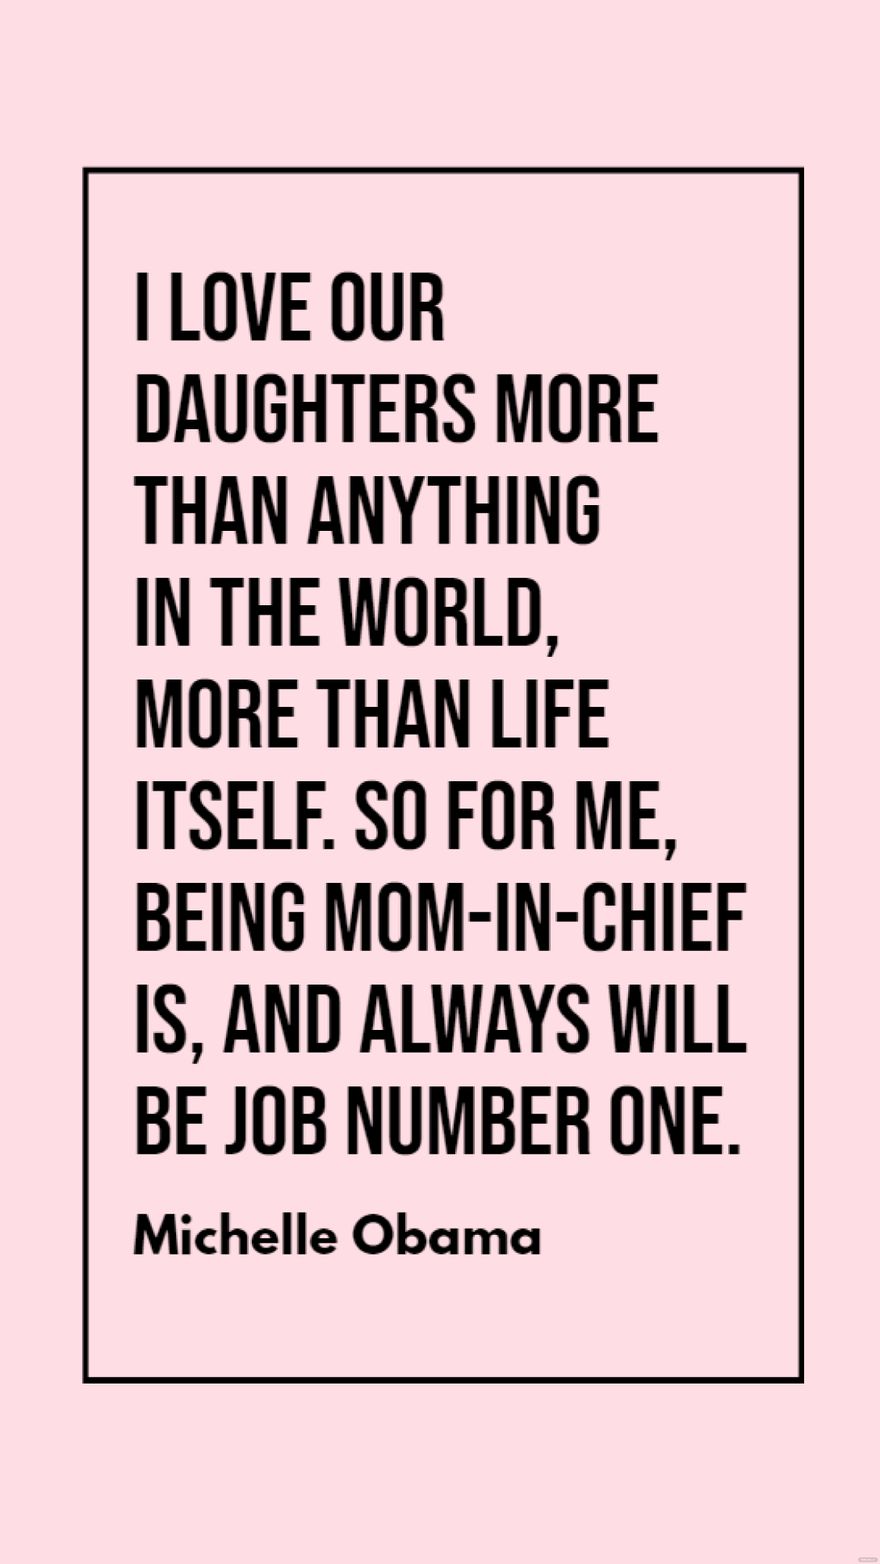 Michelle Obama - I love our daughters more than anything in the world, more than life itself. So for me, being Mom-in-Chief is, and always will be job number one.